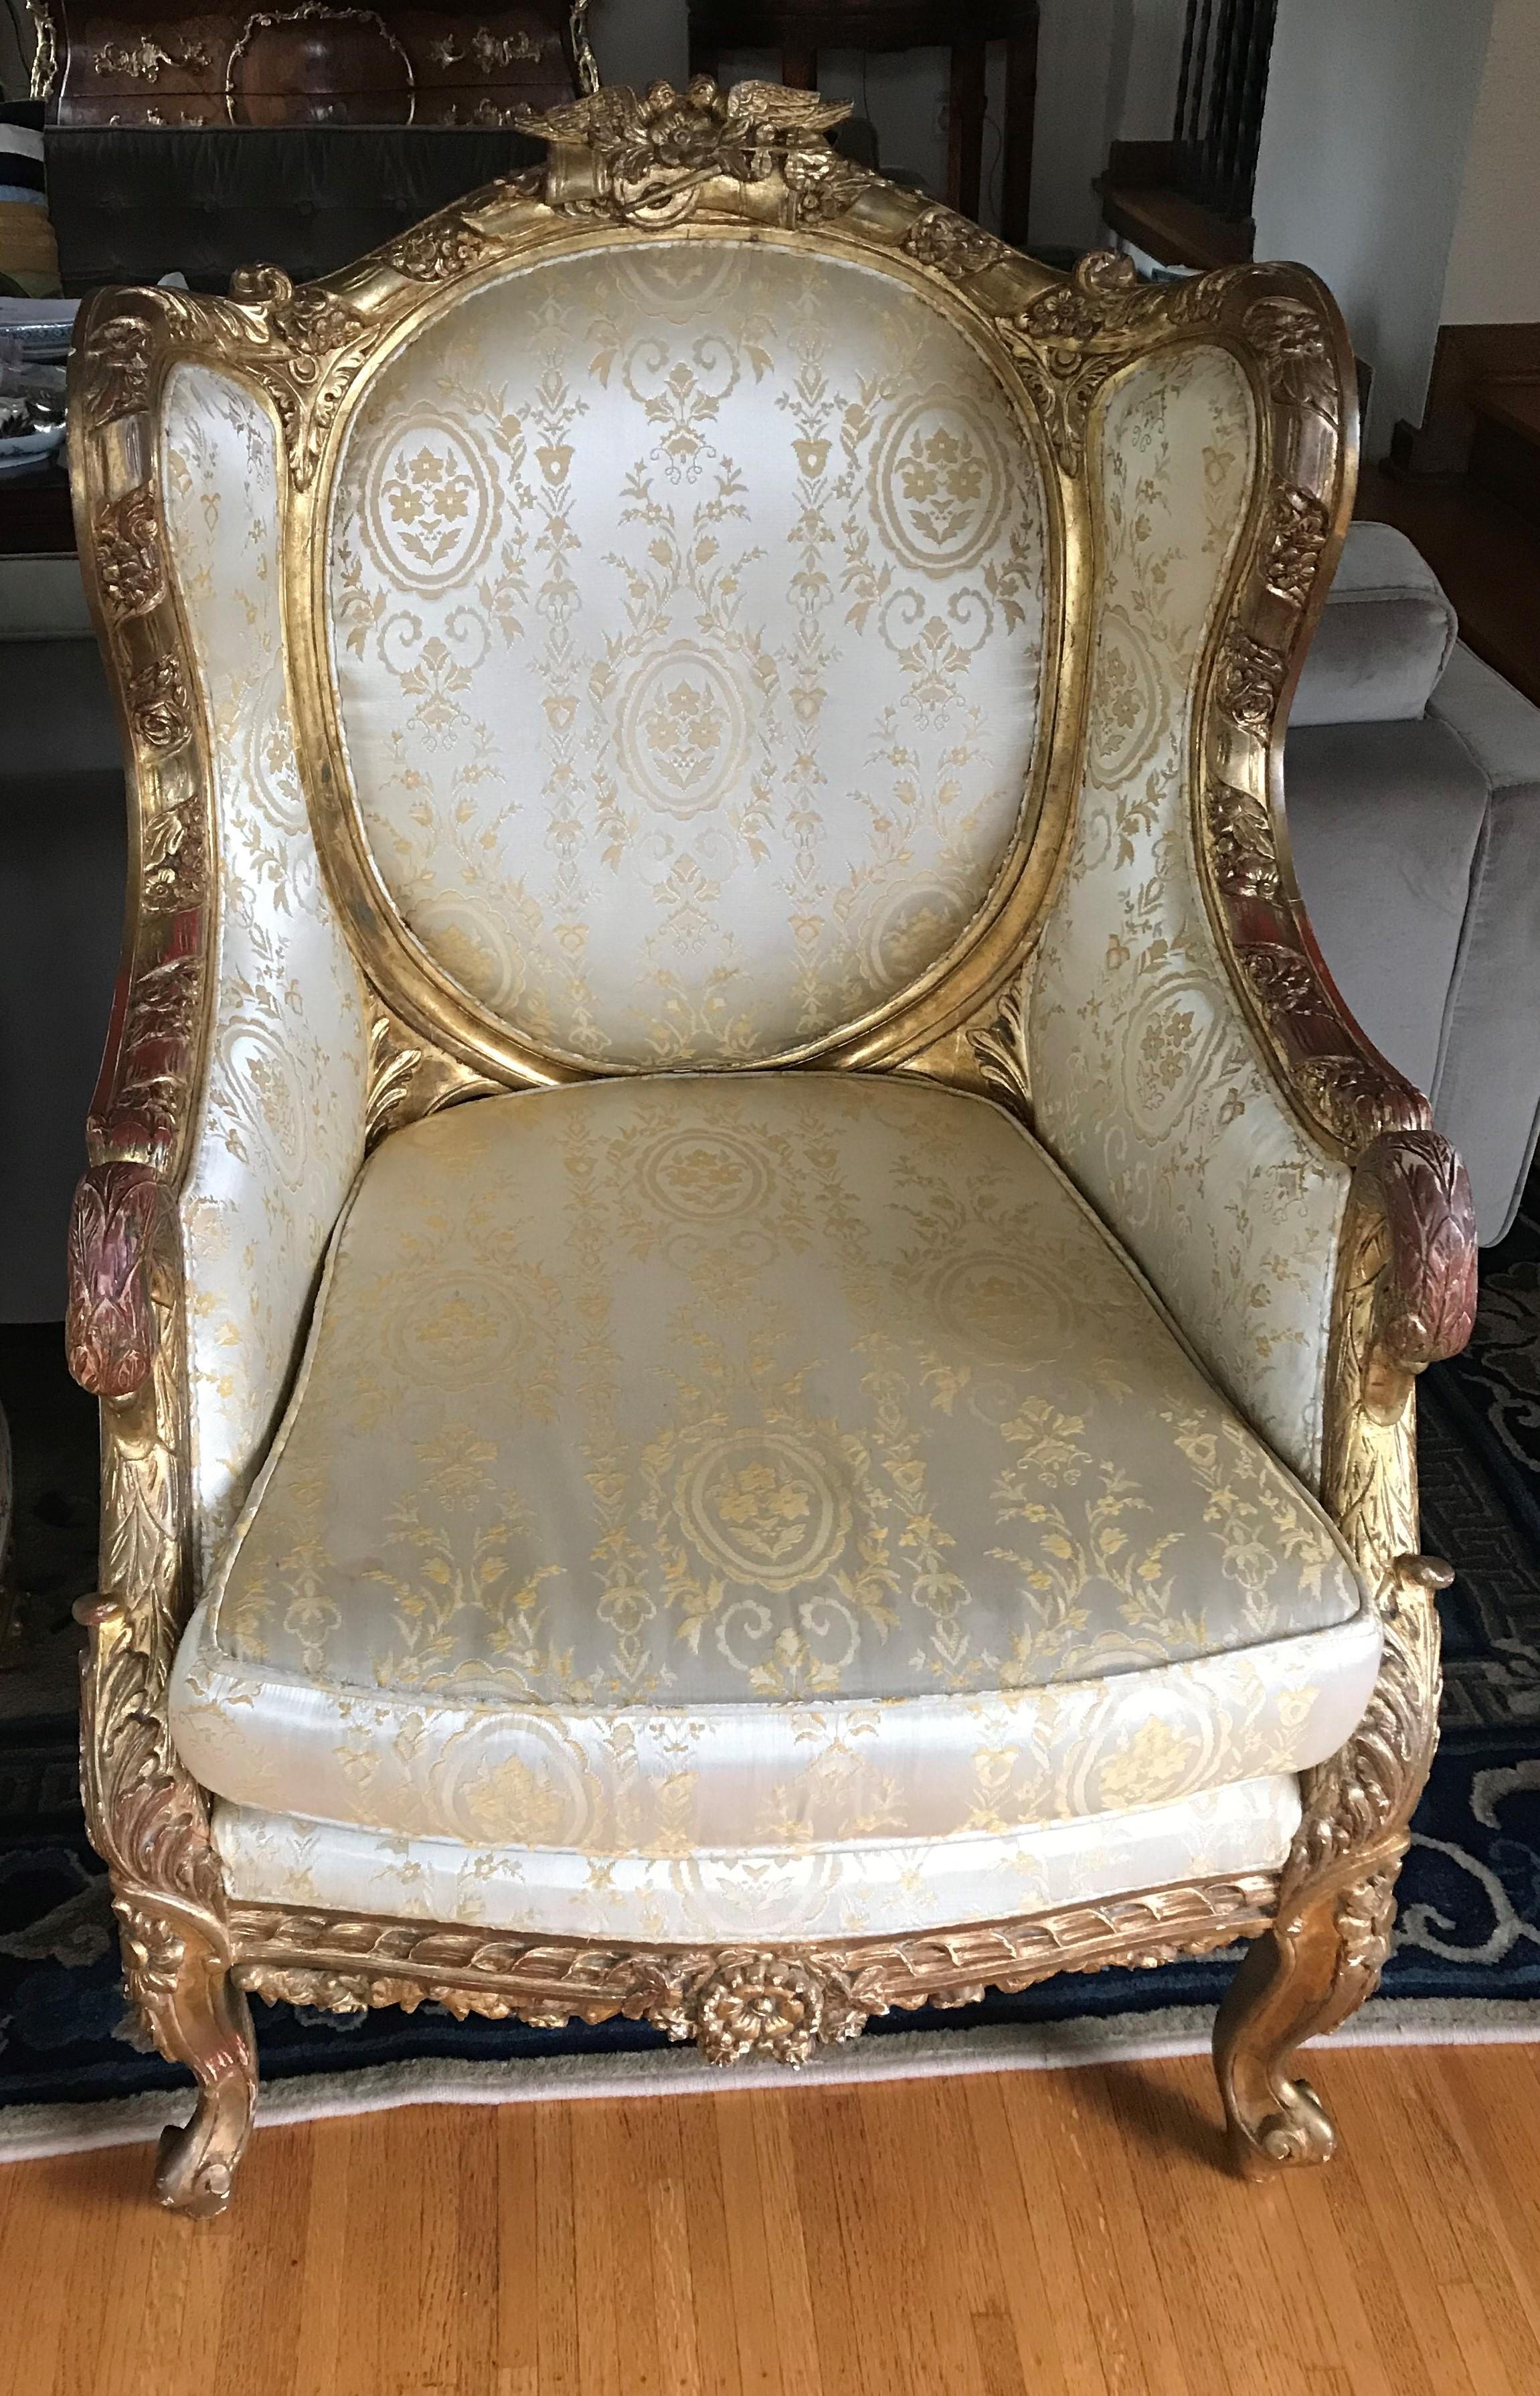 Gorgeous pair of antique European upholstered armchairs. Gold gesso over wood. Swan arms, lovebirds at top. Upholstered in a gold fabric, cushion seat.

19th century in date. Lovely old wear with spots of the red bole showing through. Solid